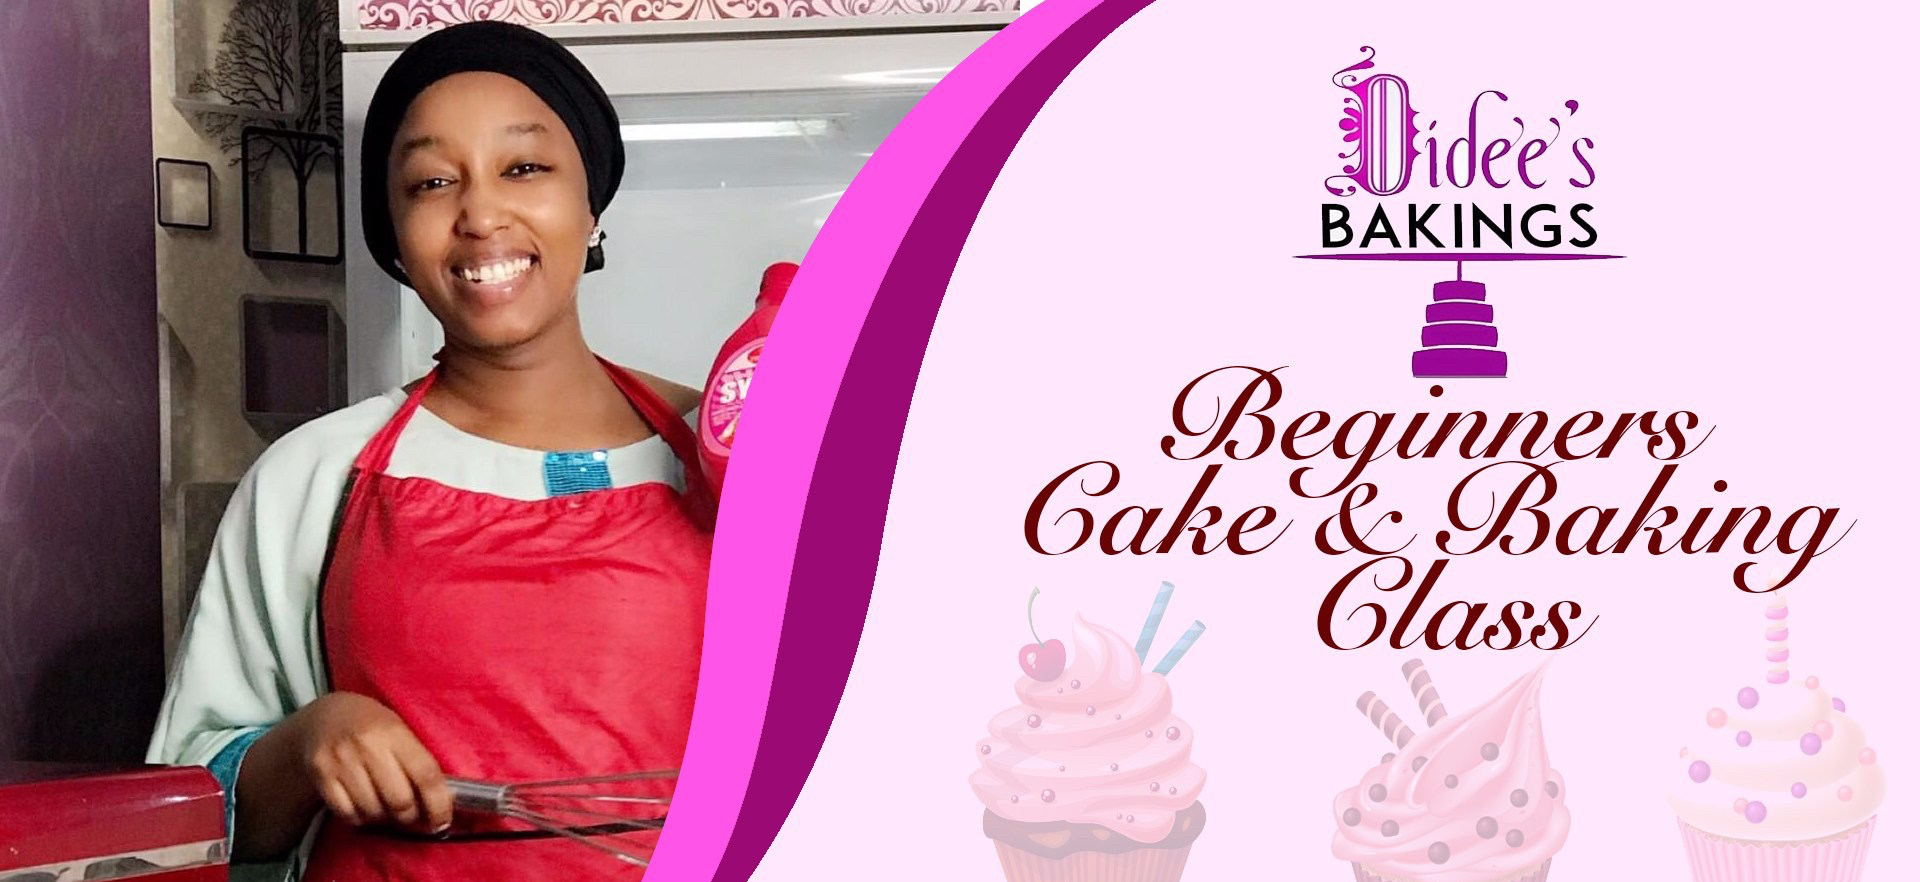 You are currently viewing Didee’s Bakings | How it all started